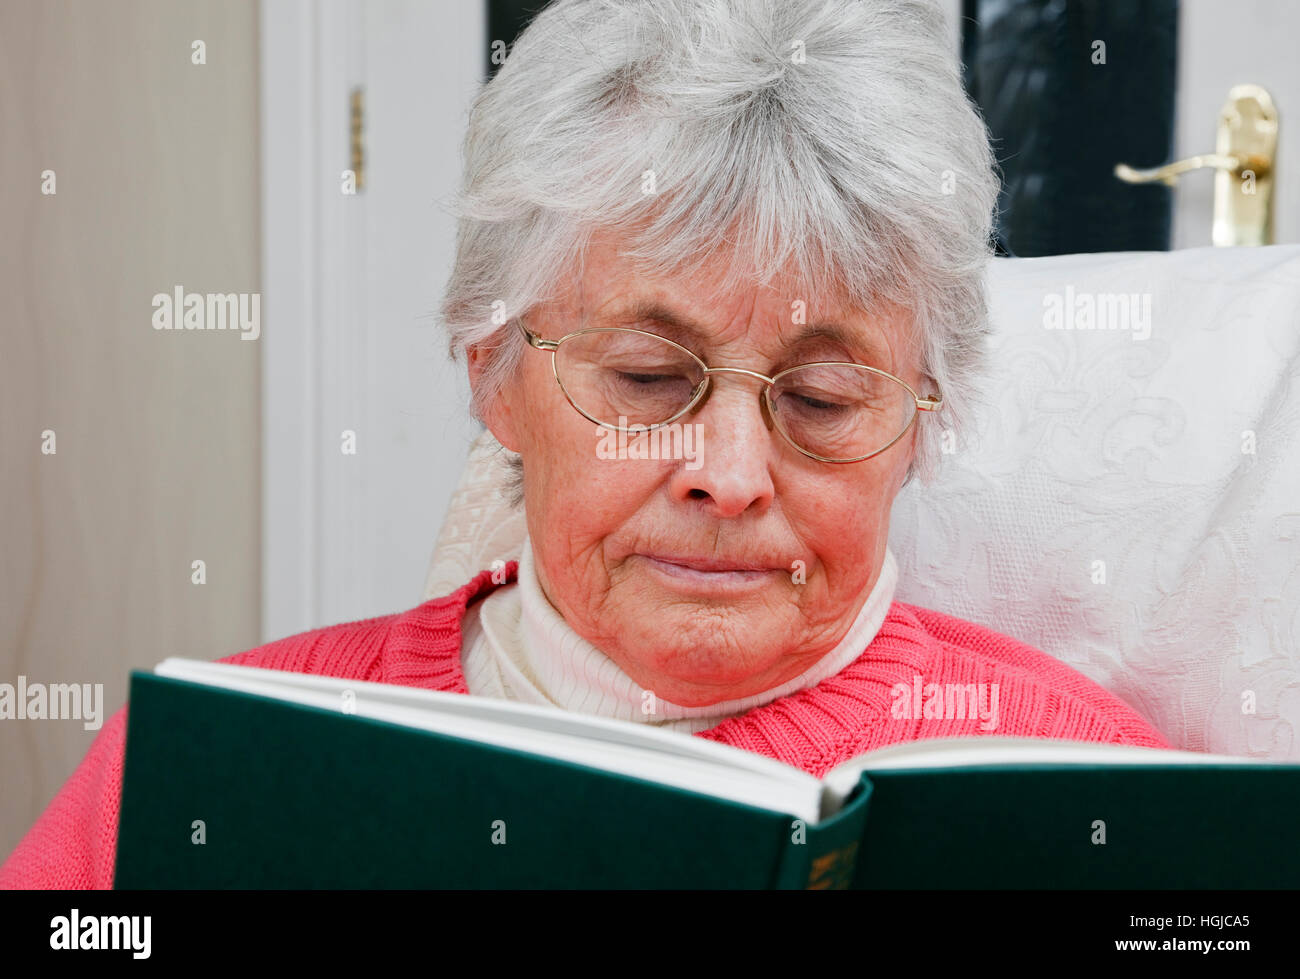 Old aged retired elderly senior woman retiree wearing spectacles enjoying retirement sat relaxing reading a book indoors at home. England UK Britain Stock Photo